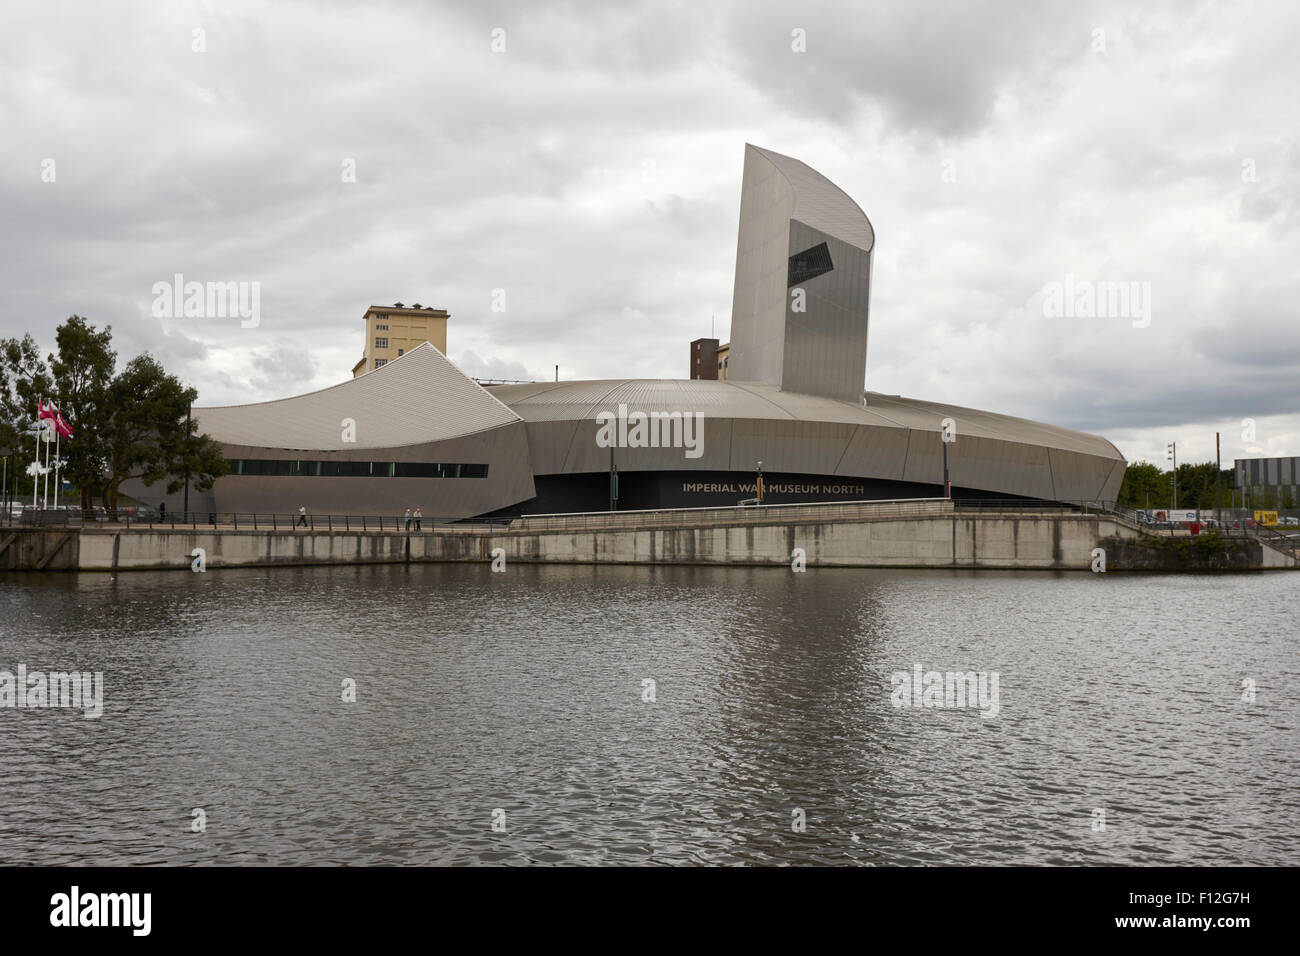 Imperial war museum north salford quays Manchester uk Stock Photo